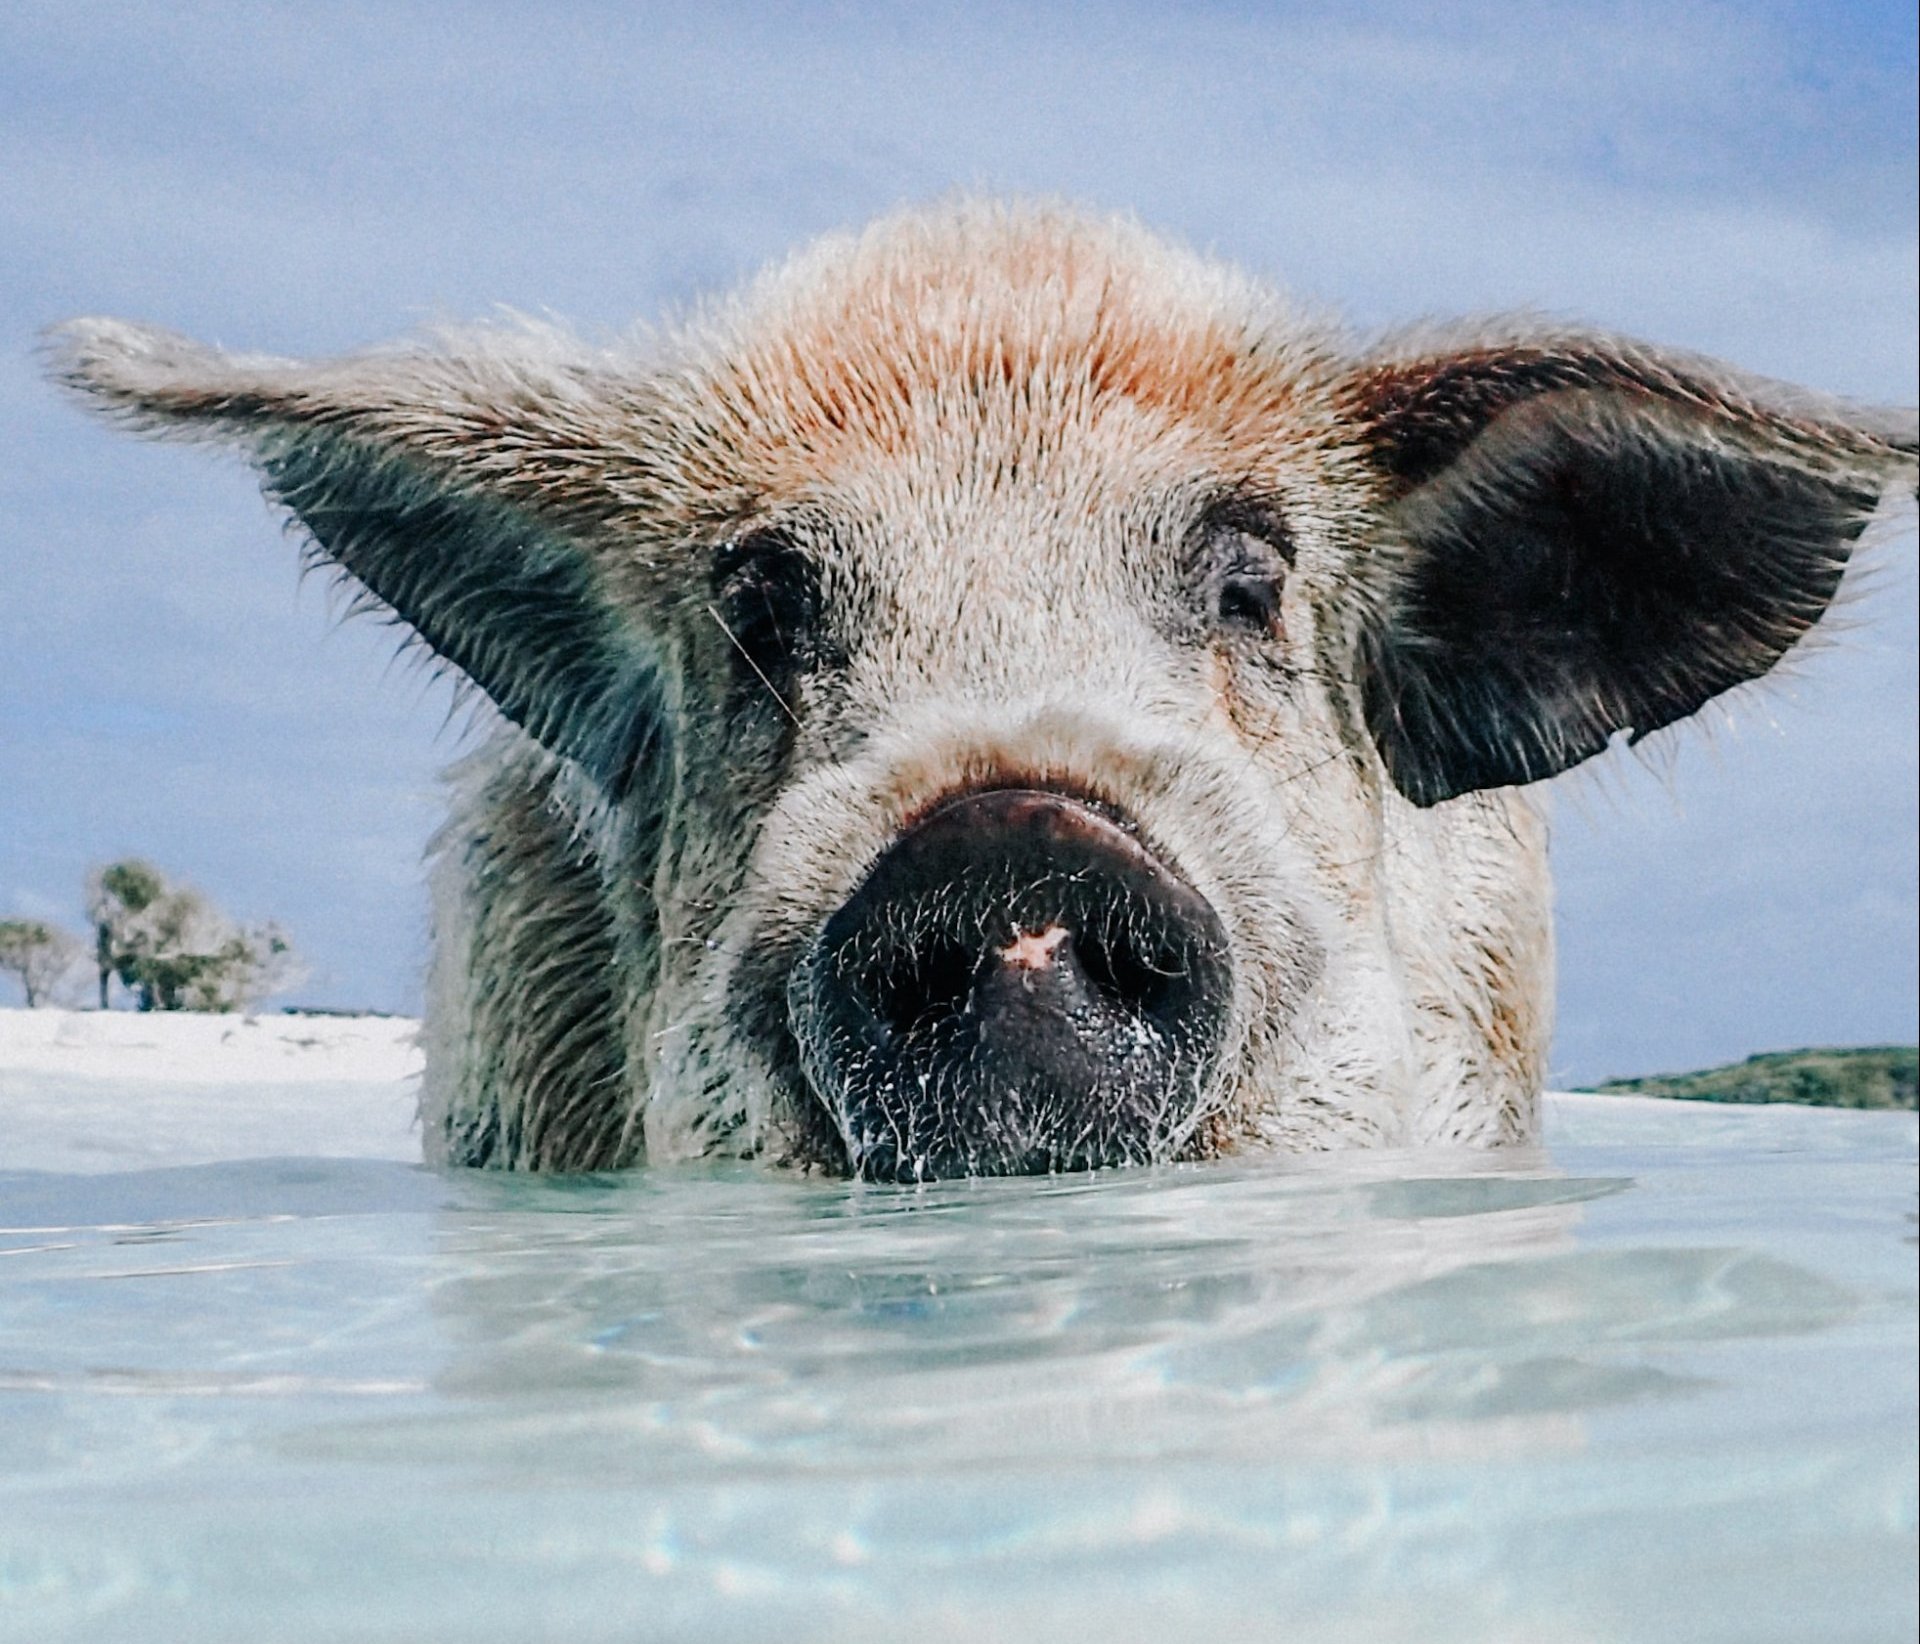 large pig standing in shallow beach waters at Pig Beach in the Bahamas